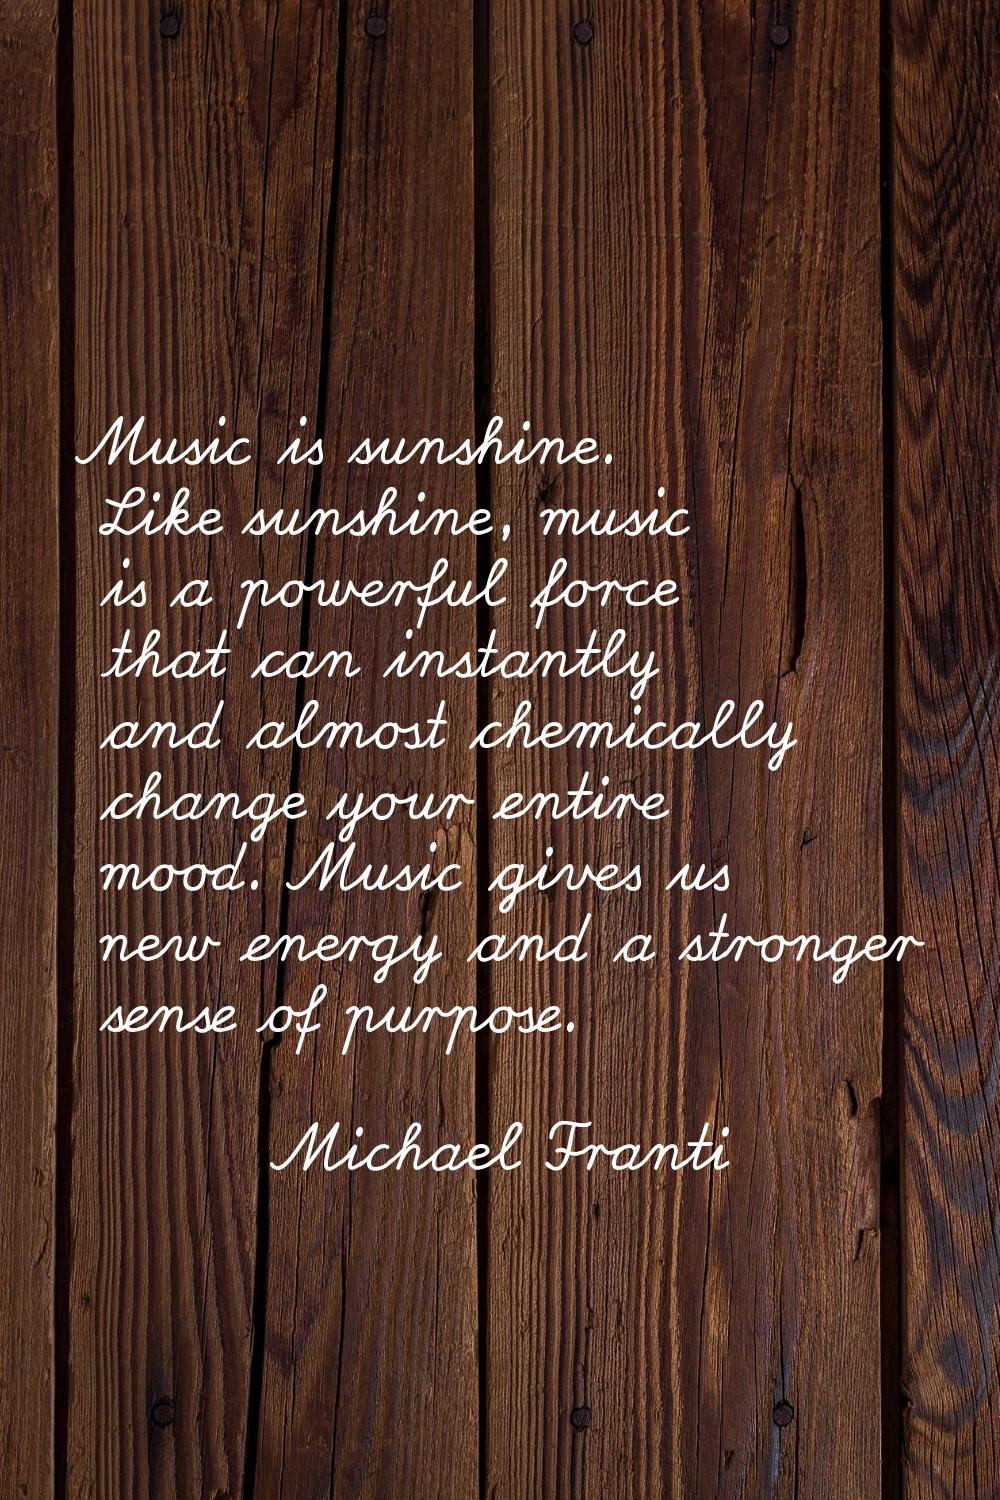 Music is sunshine. Like sunshine, music is a powerful force that can instantly and almost chemicall